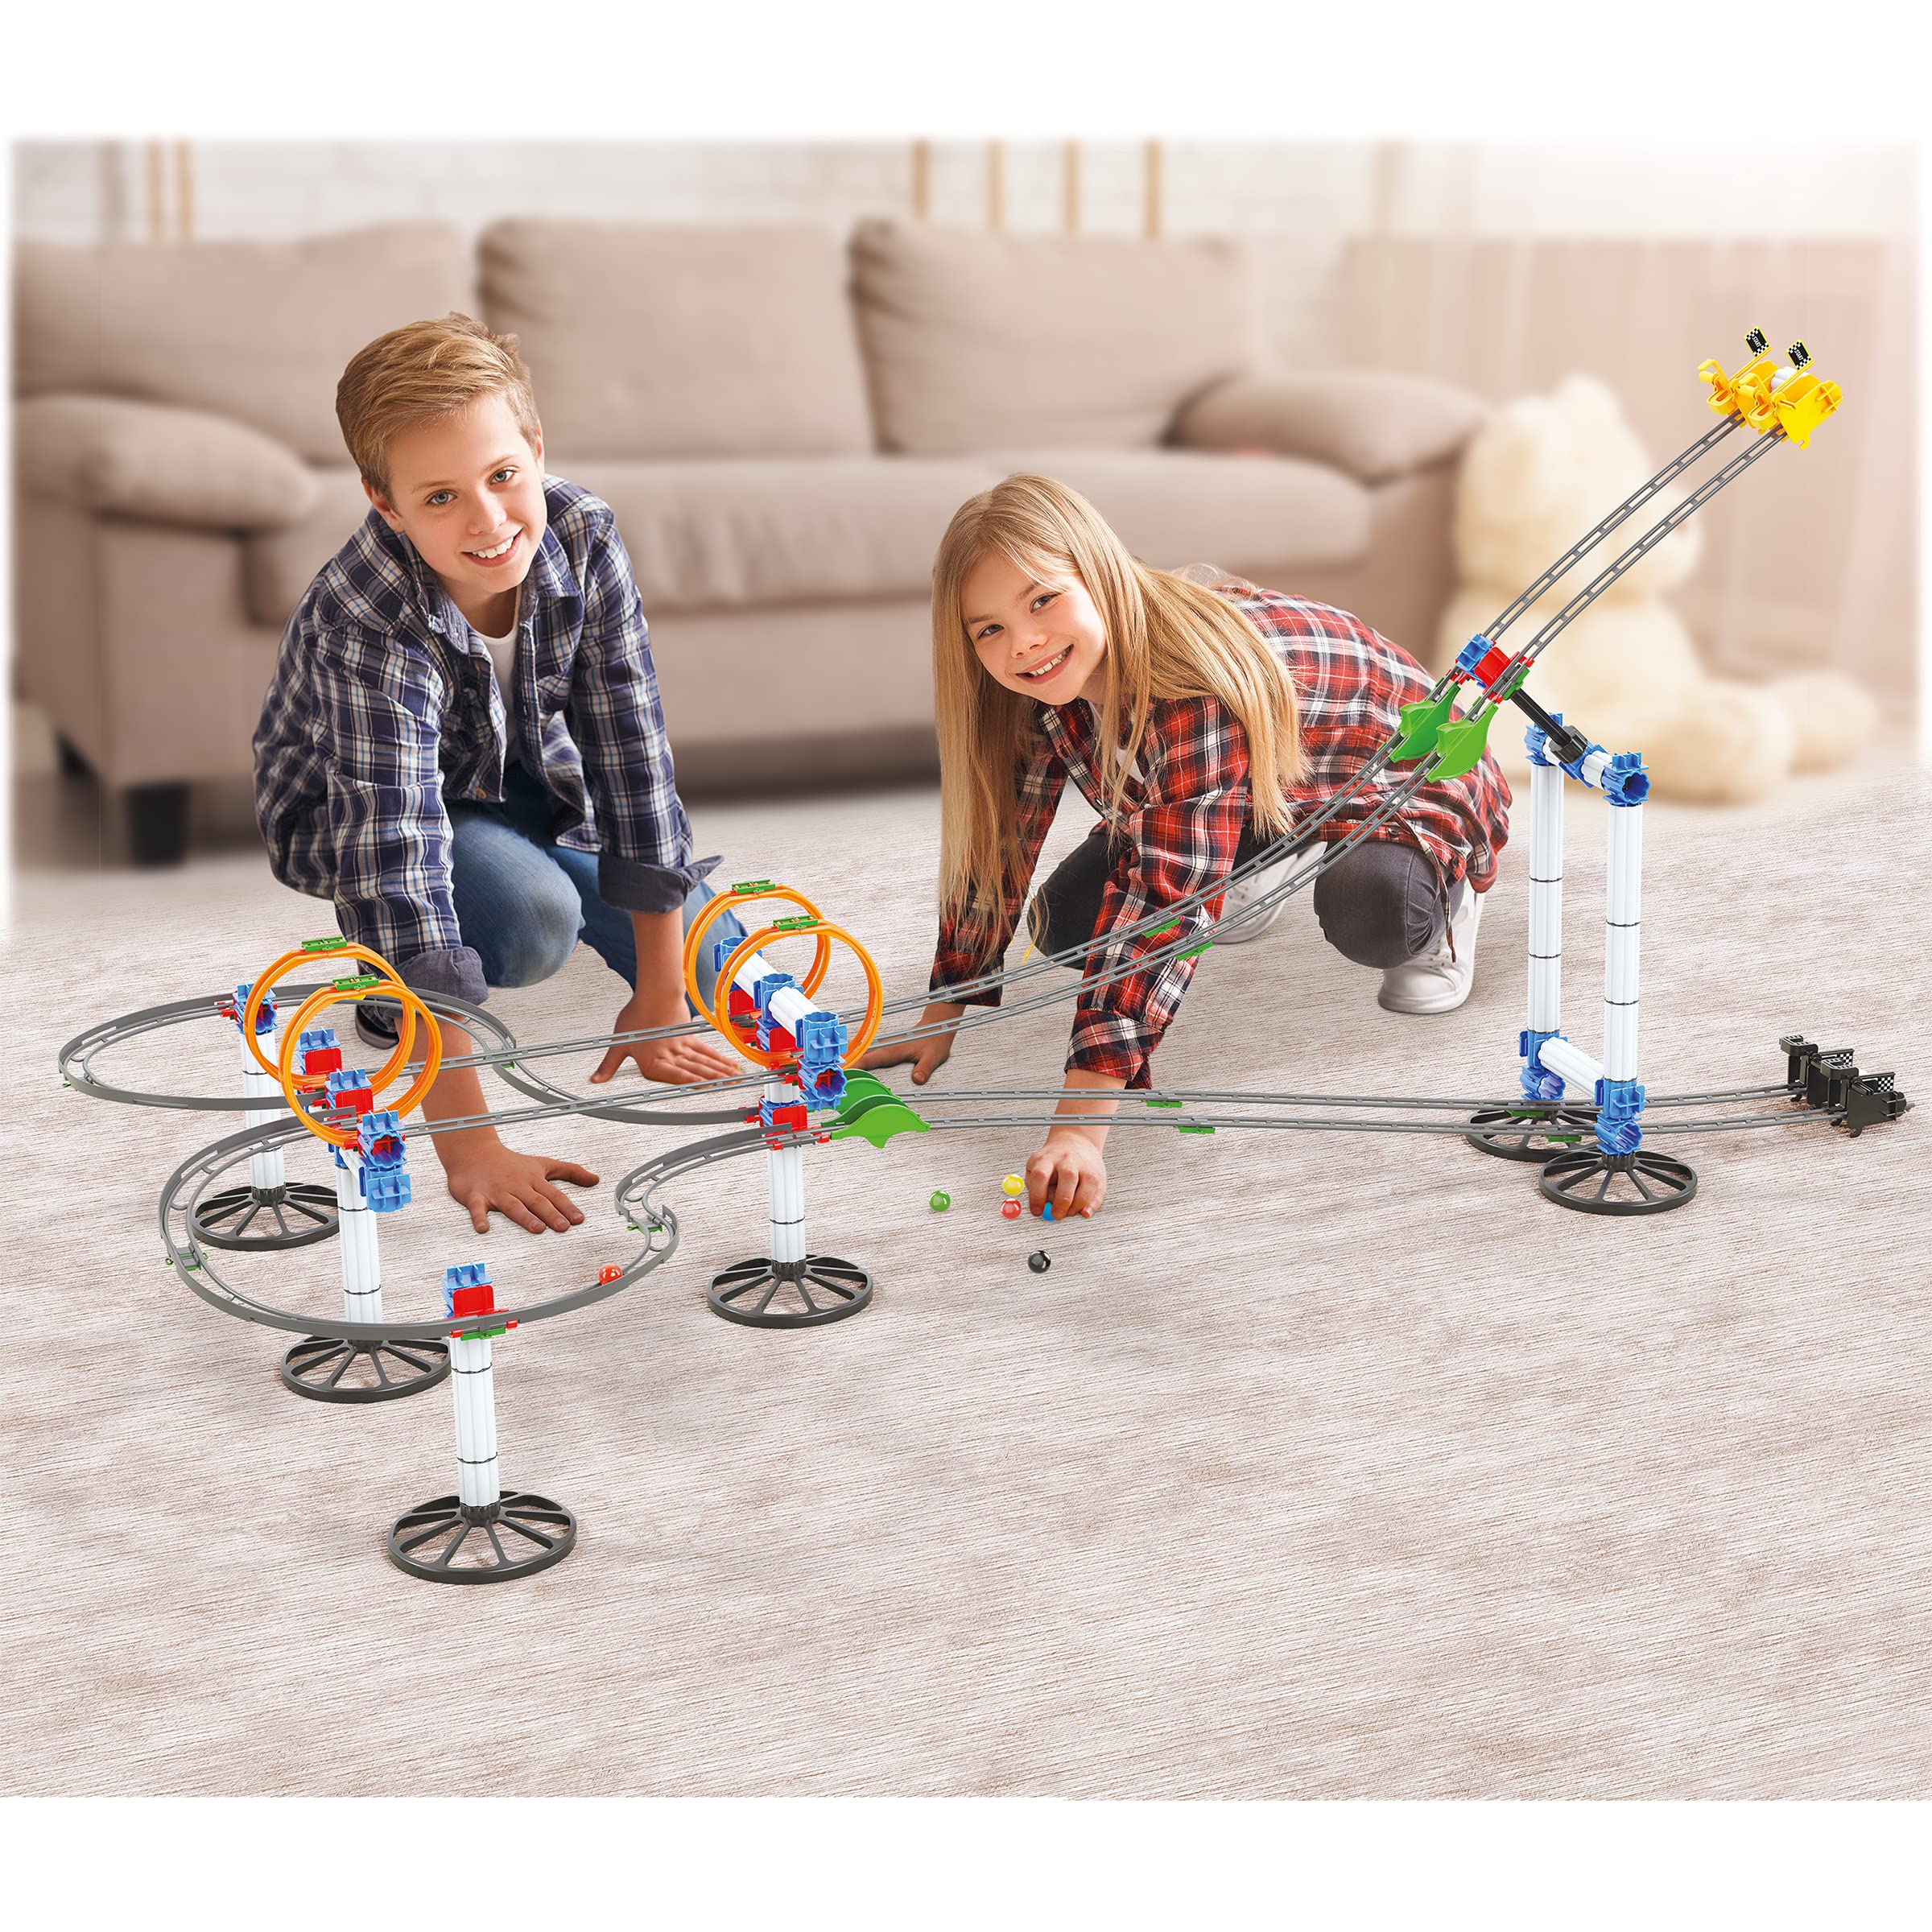 Quercetti Skyrail League Marble Run - Build Parallel Tracks with Loops and Jumps for Side-by-Side Racing, 166 Piece Set with 5 Marbles and Over 24 Feet of Track, for Kids Ages 7 Years and Up